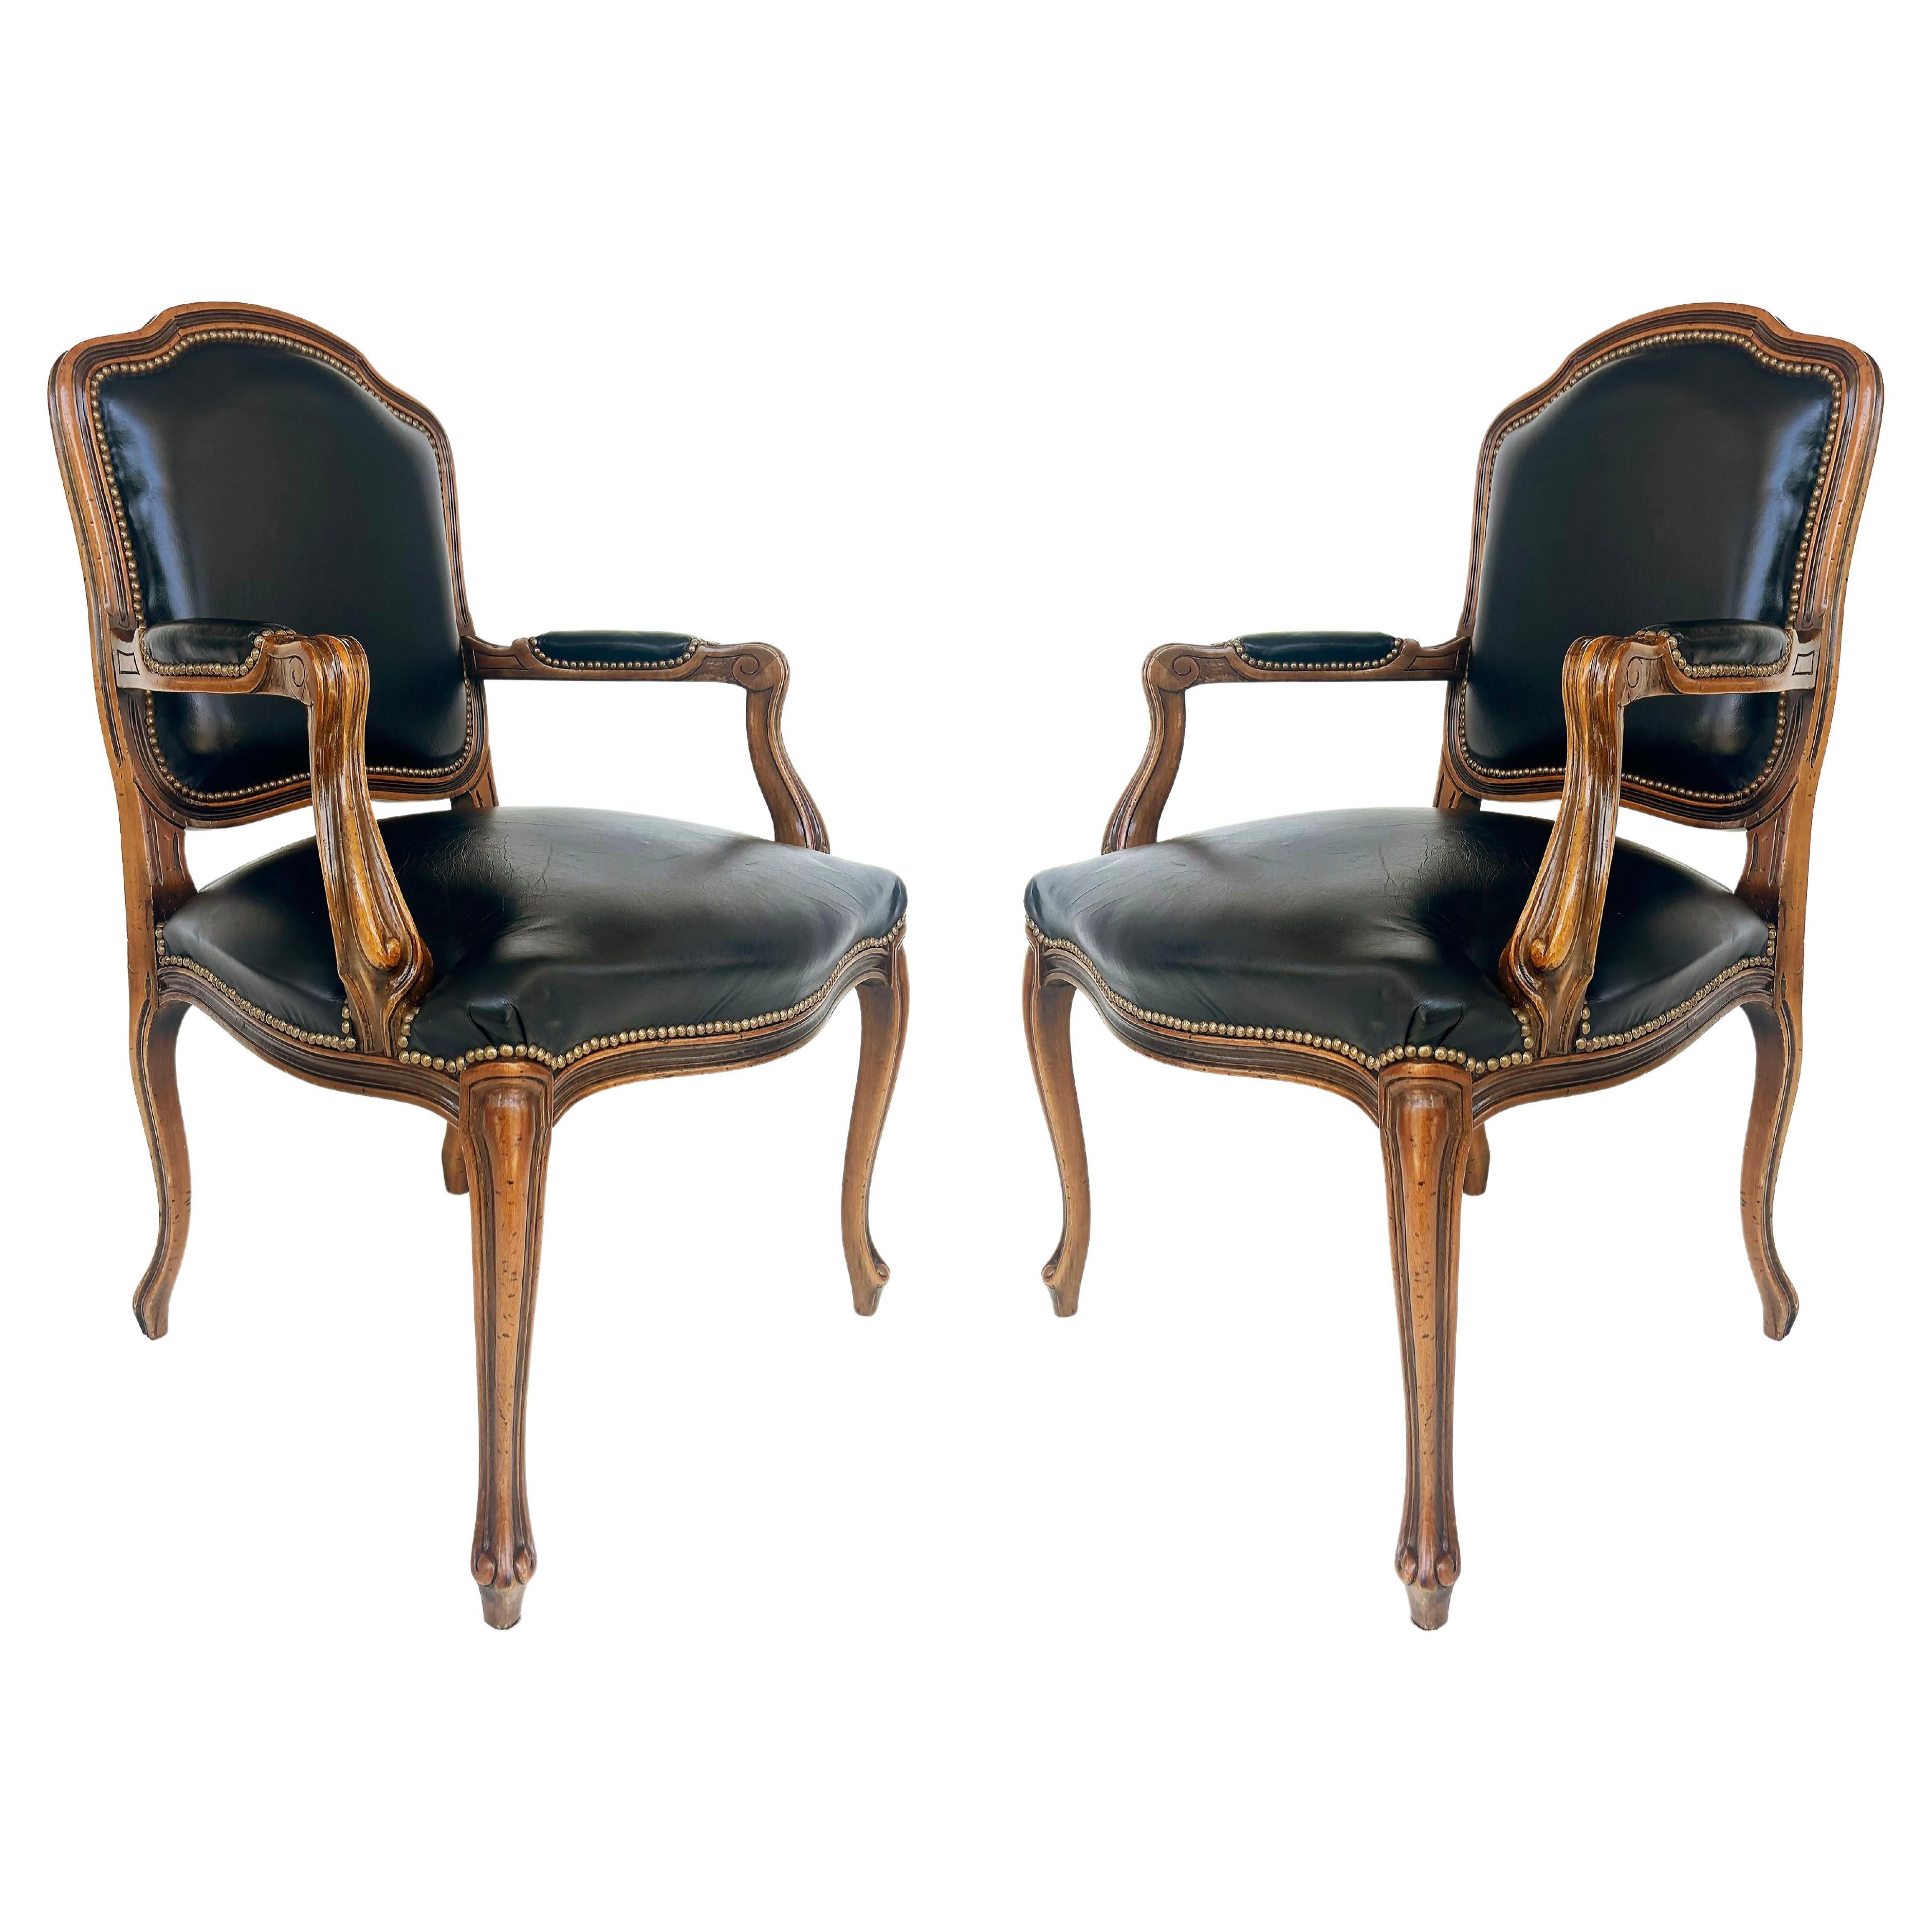 Vintage Italian Chateau D'Ax Leather Armchairs with Brass Nailhead Details, Pair For Sale 7